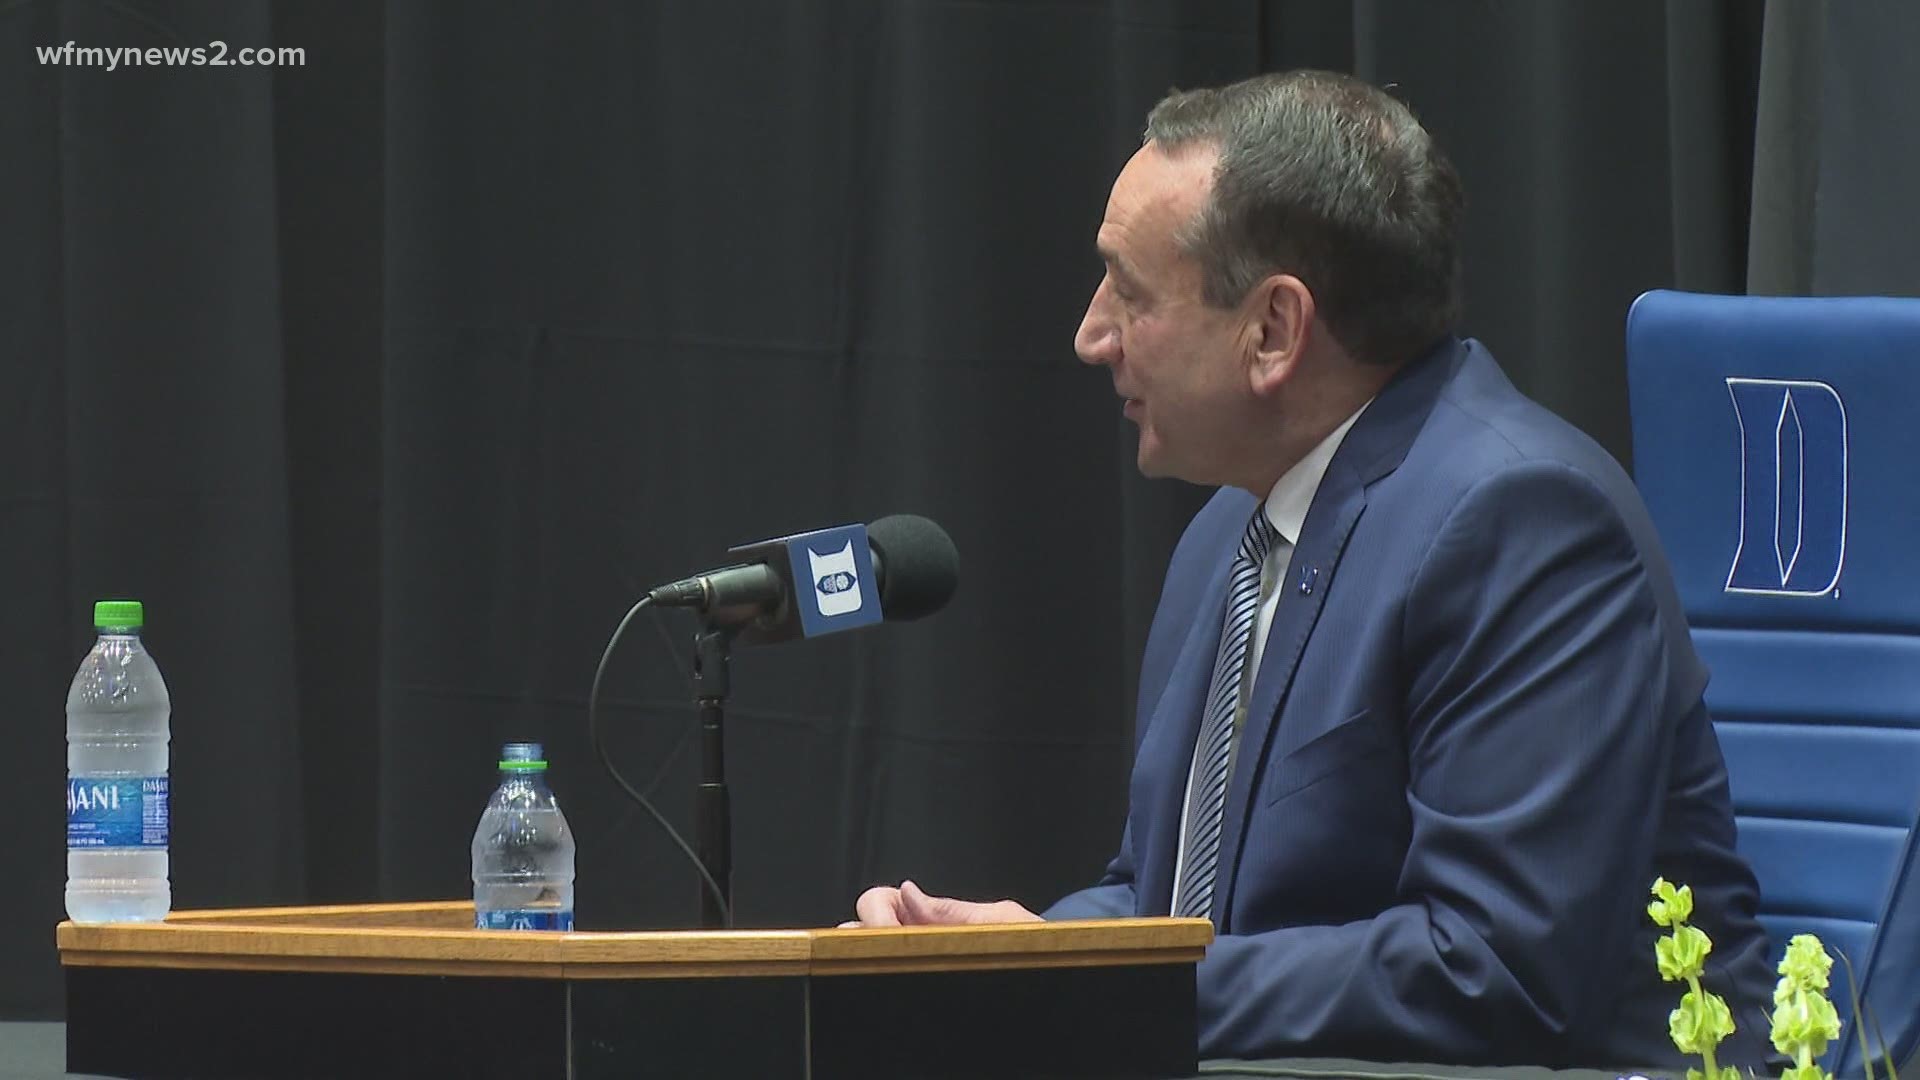 Krzyzewski joined the Blue Devils as head coach in 1980, and has since led the team to five national championships and 12 Final Fours.